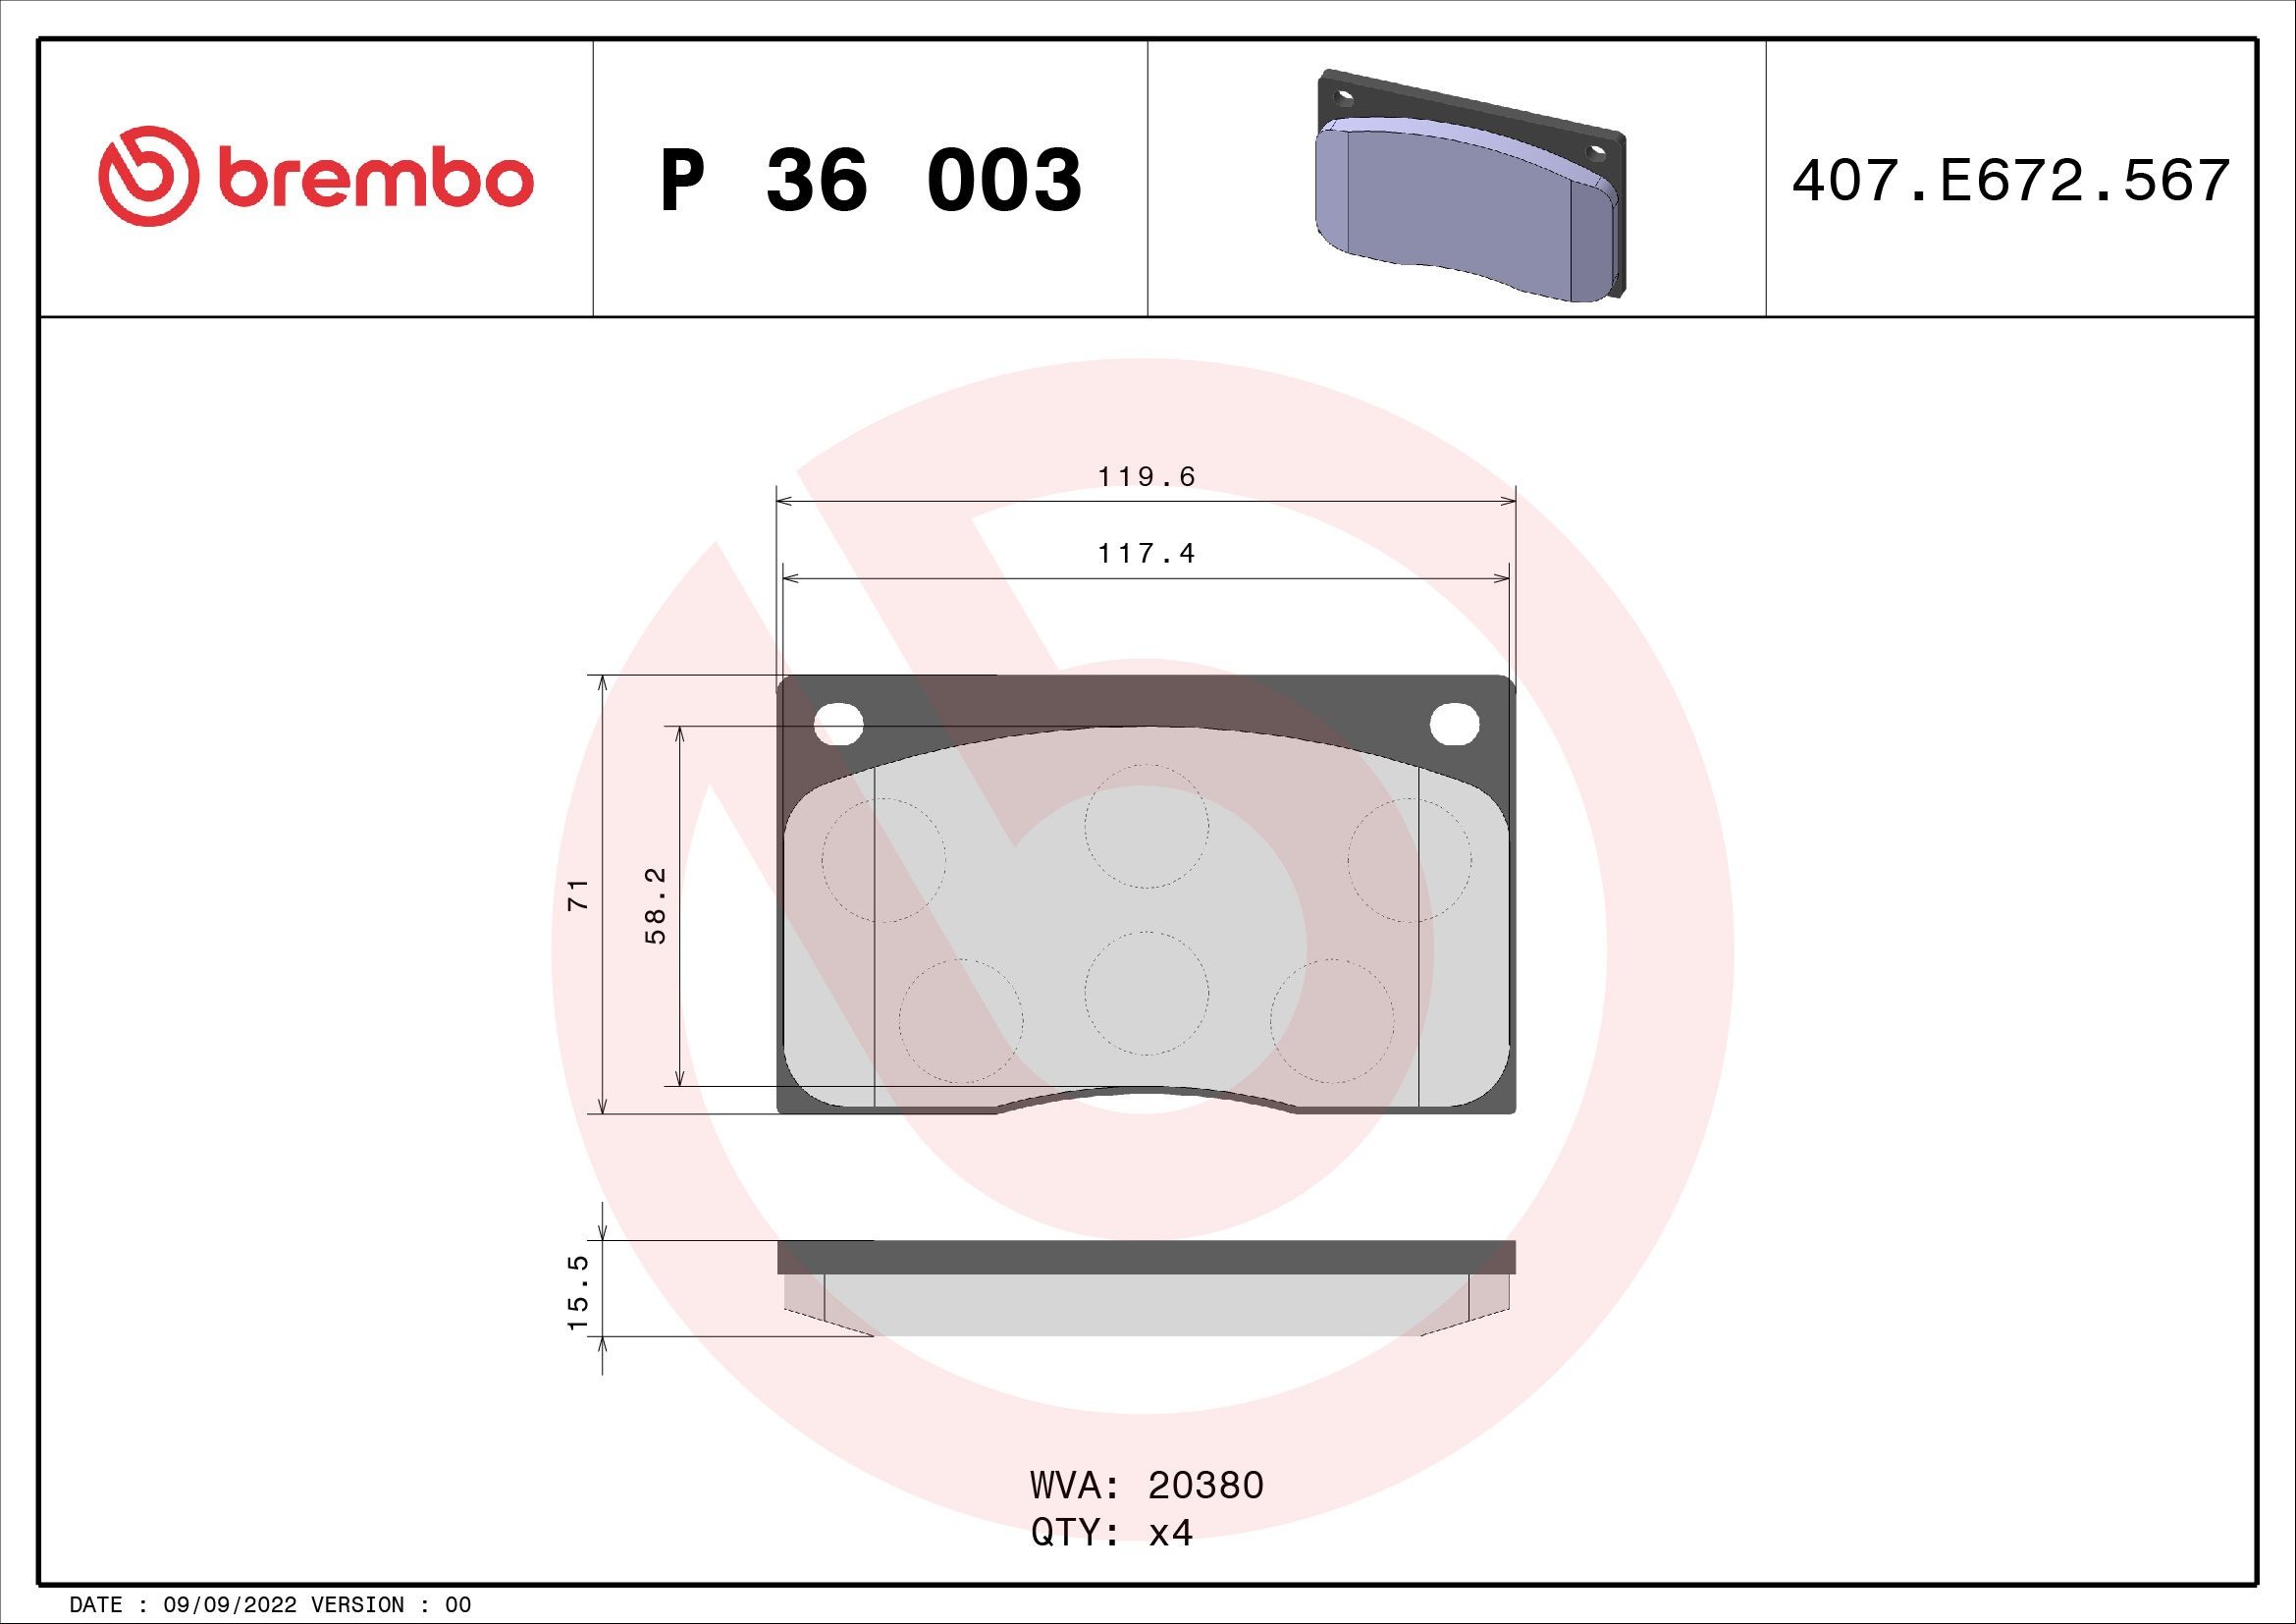 BREMBO P 36 003 Brake pad set excl. wear warning contact, without accessories